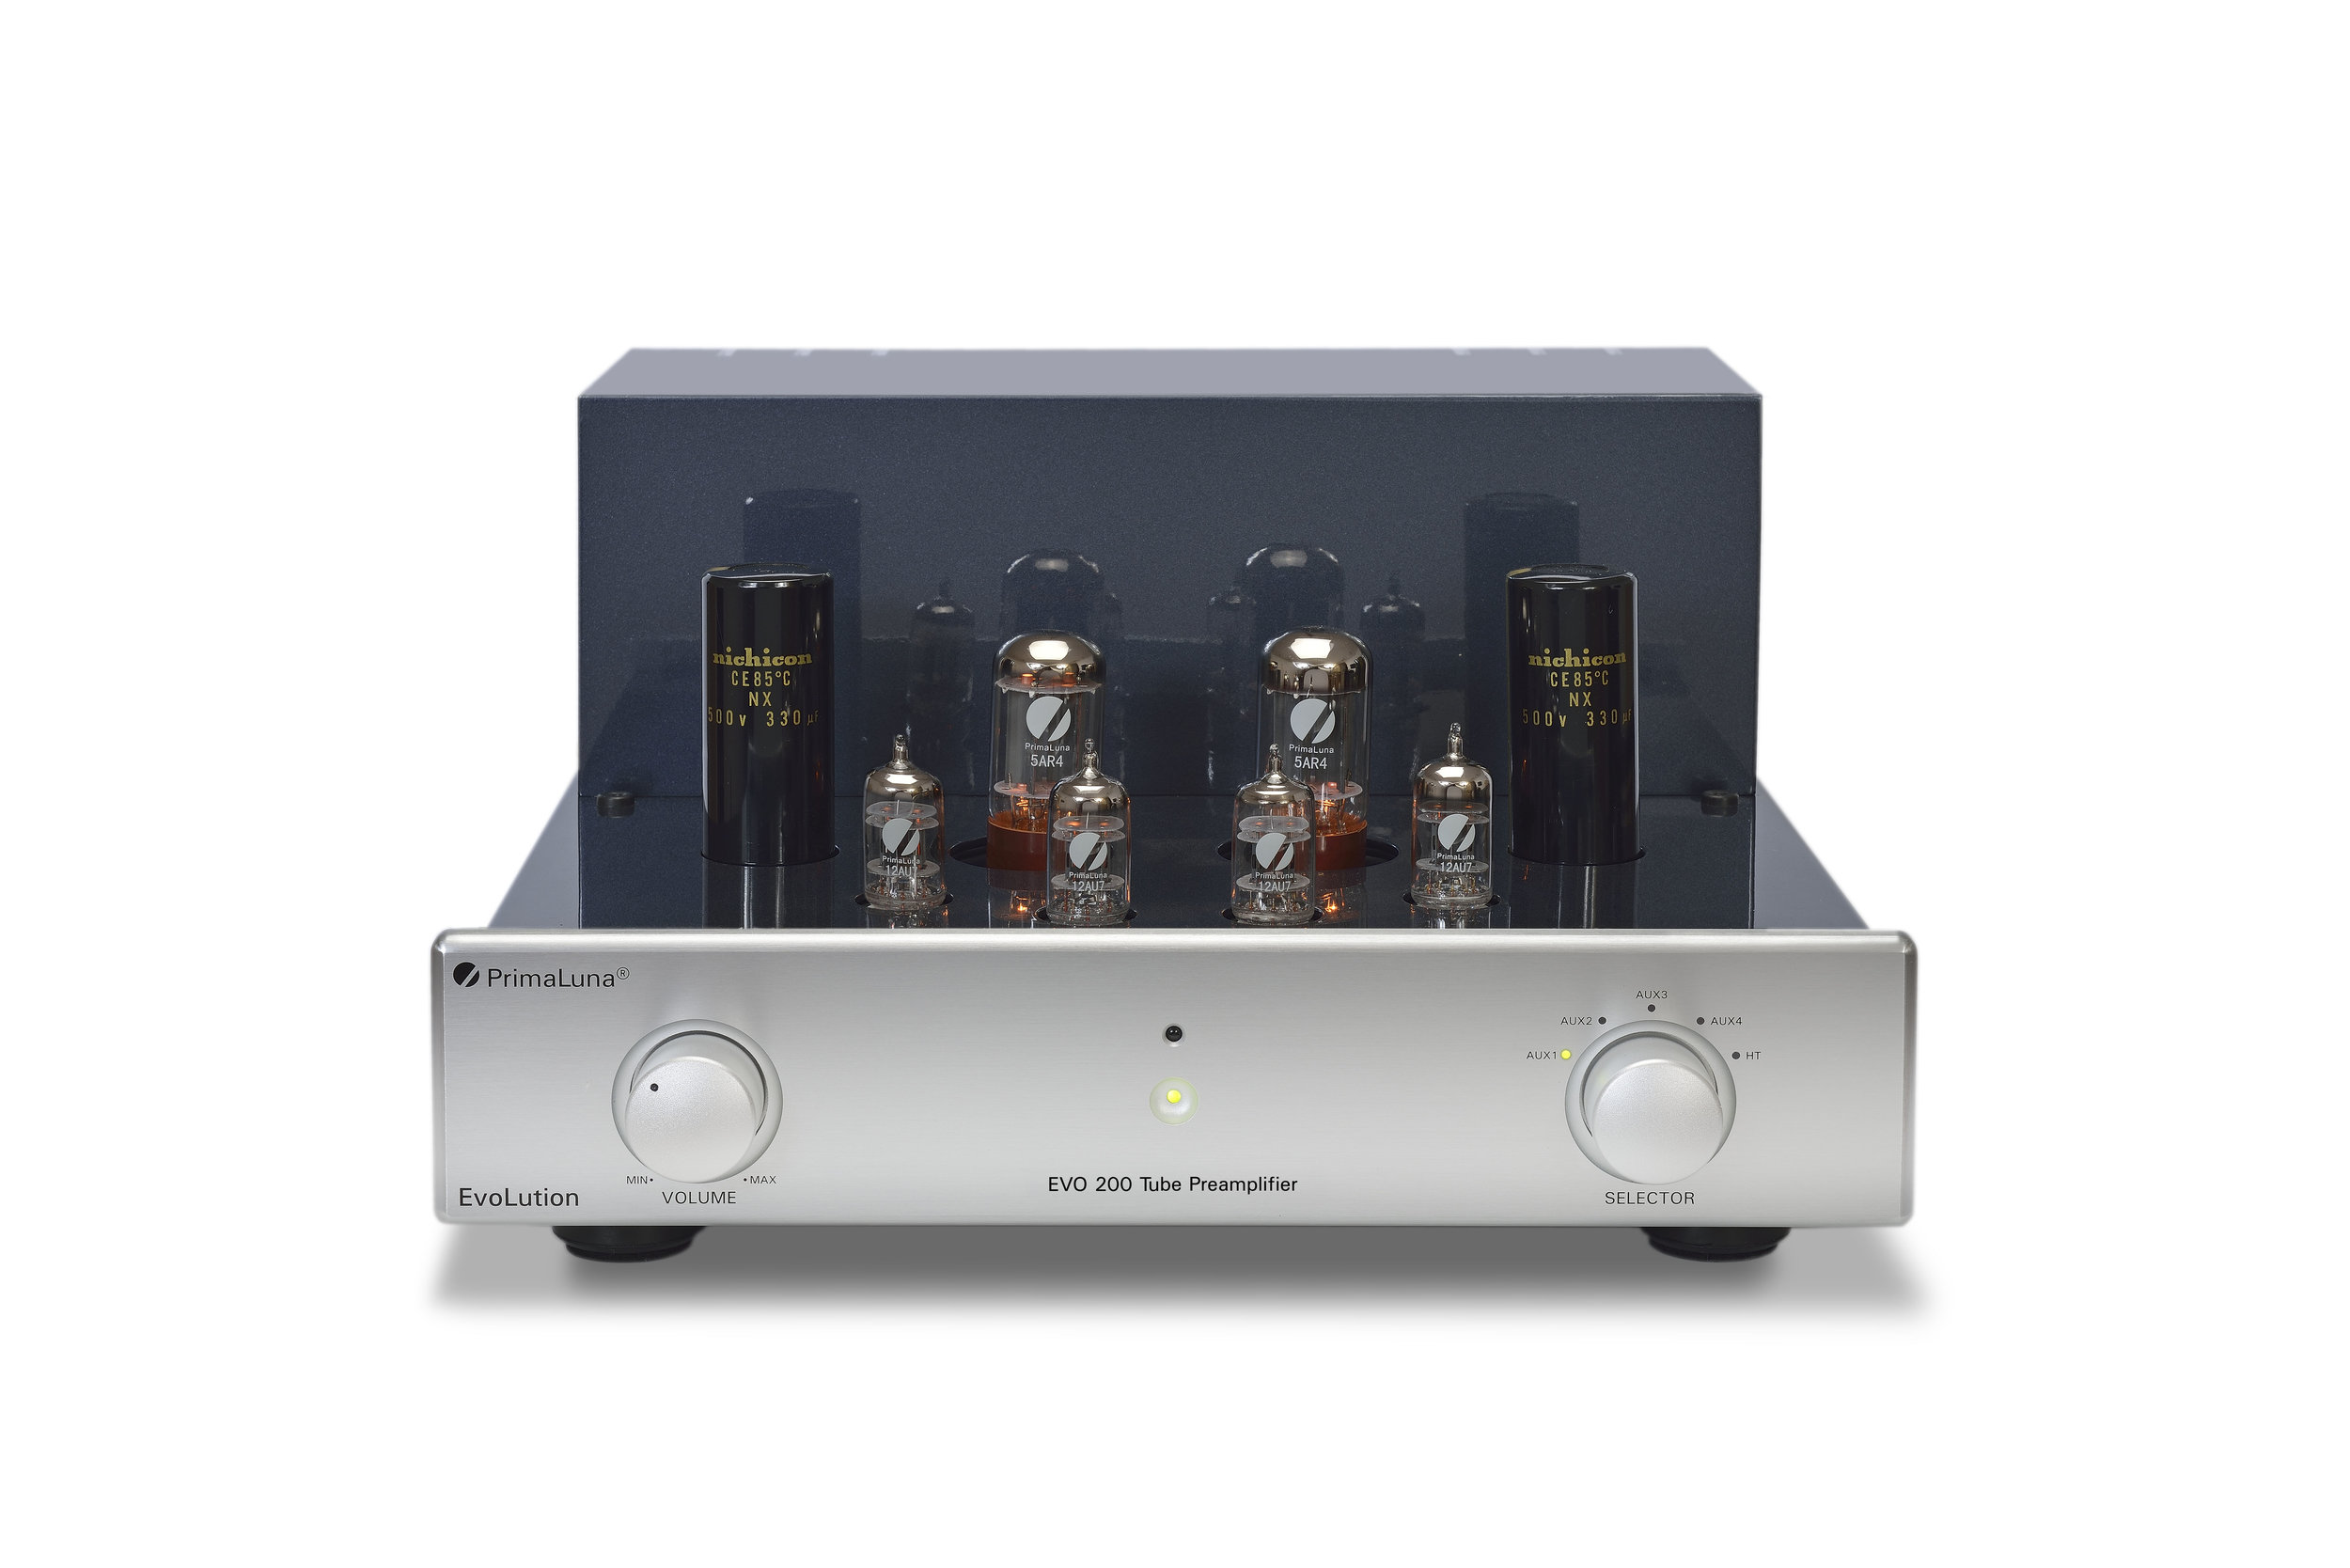 082b - PrimaLuna Evo 200 Tube Preamplifier - silver - front - without cage - white background.jpg